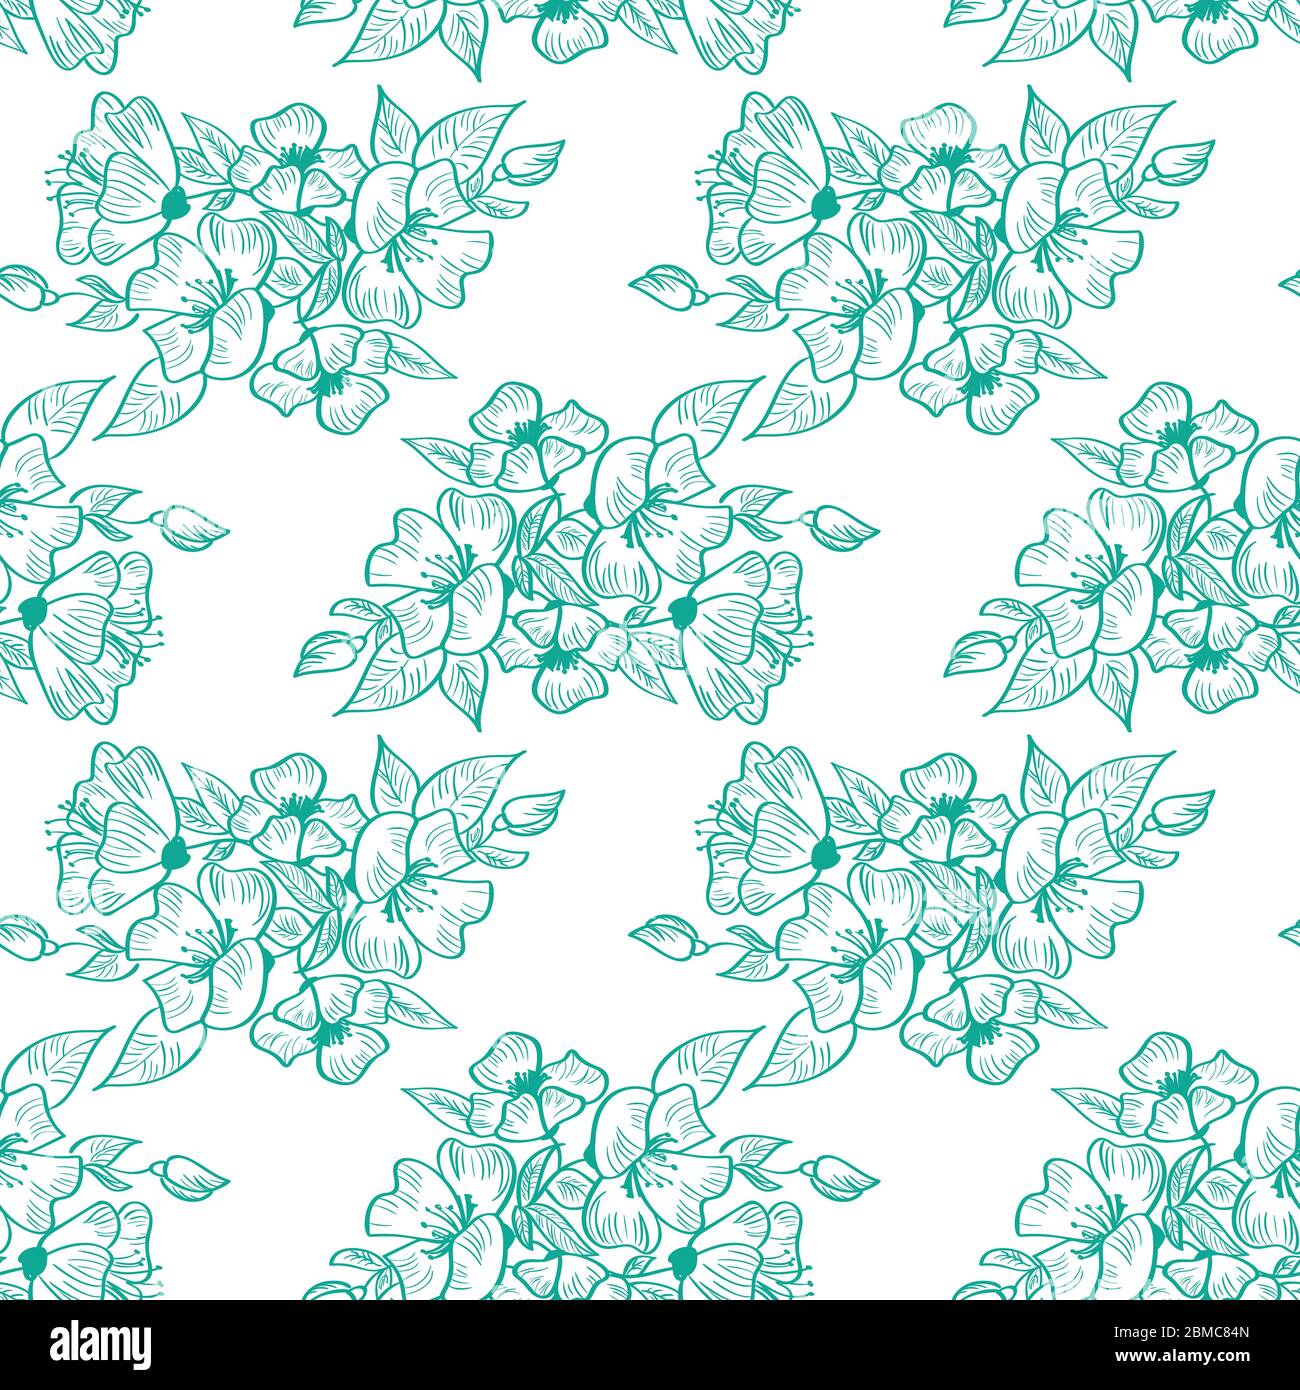 Seamless vector floral wallpaper wedding. Decorative vintage pattern in classic style with flowers spring Stock Vector